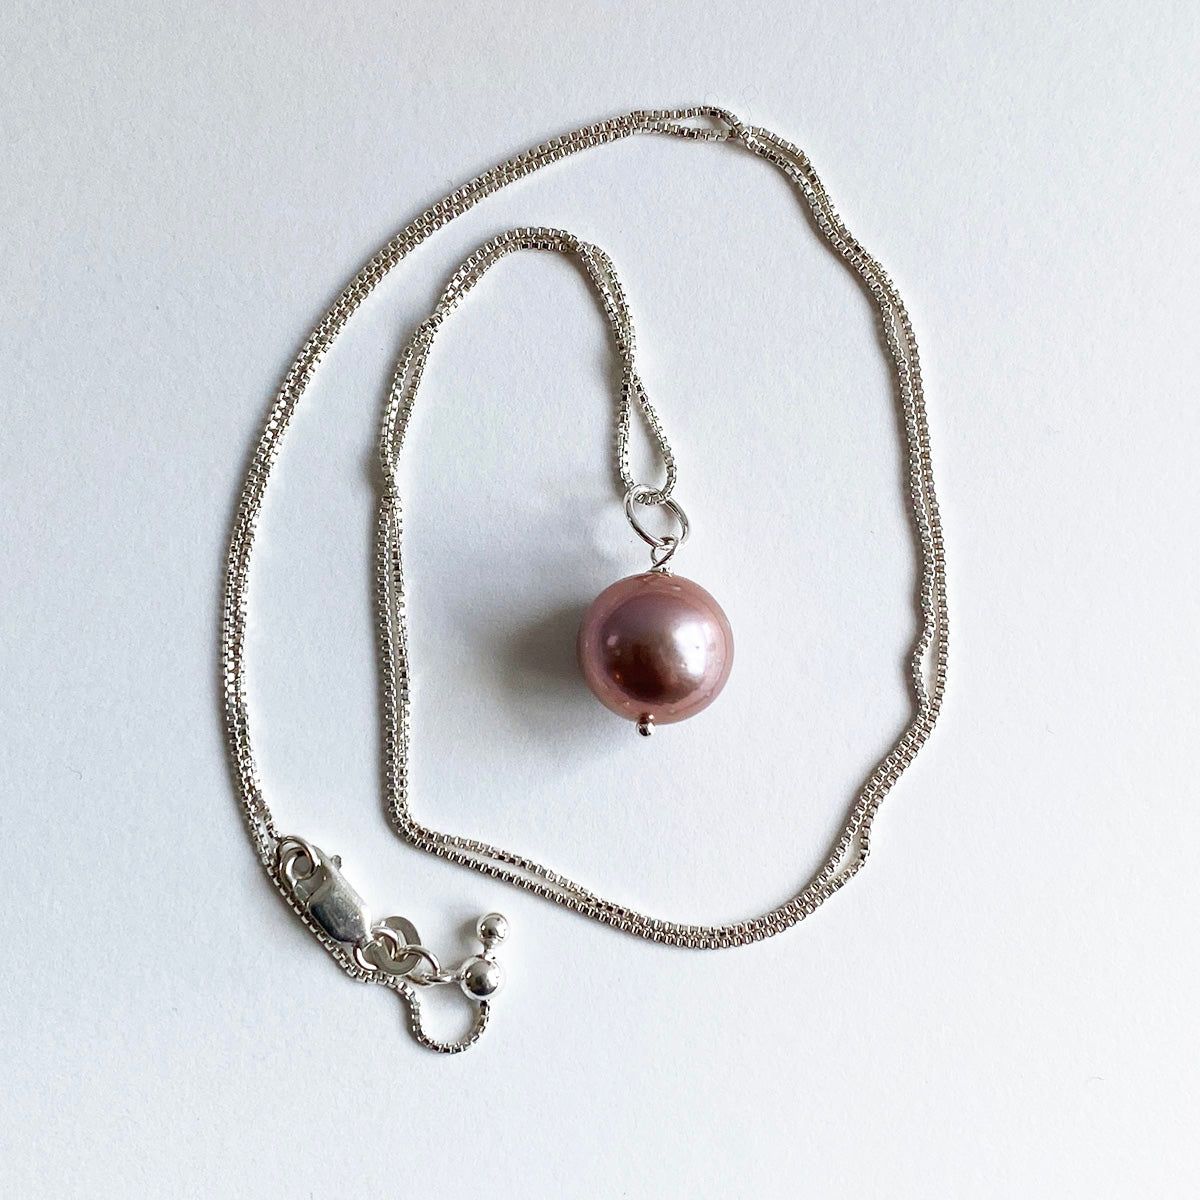 12mm Freshwater Lavender Edison Pearl Pendant by Linda Queally